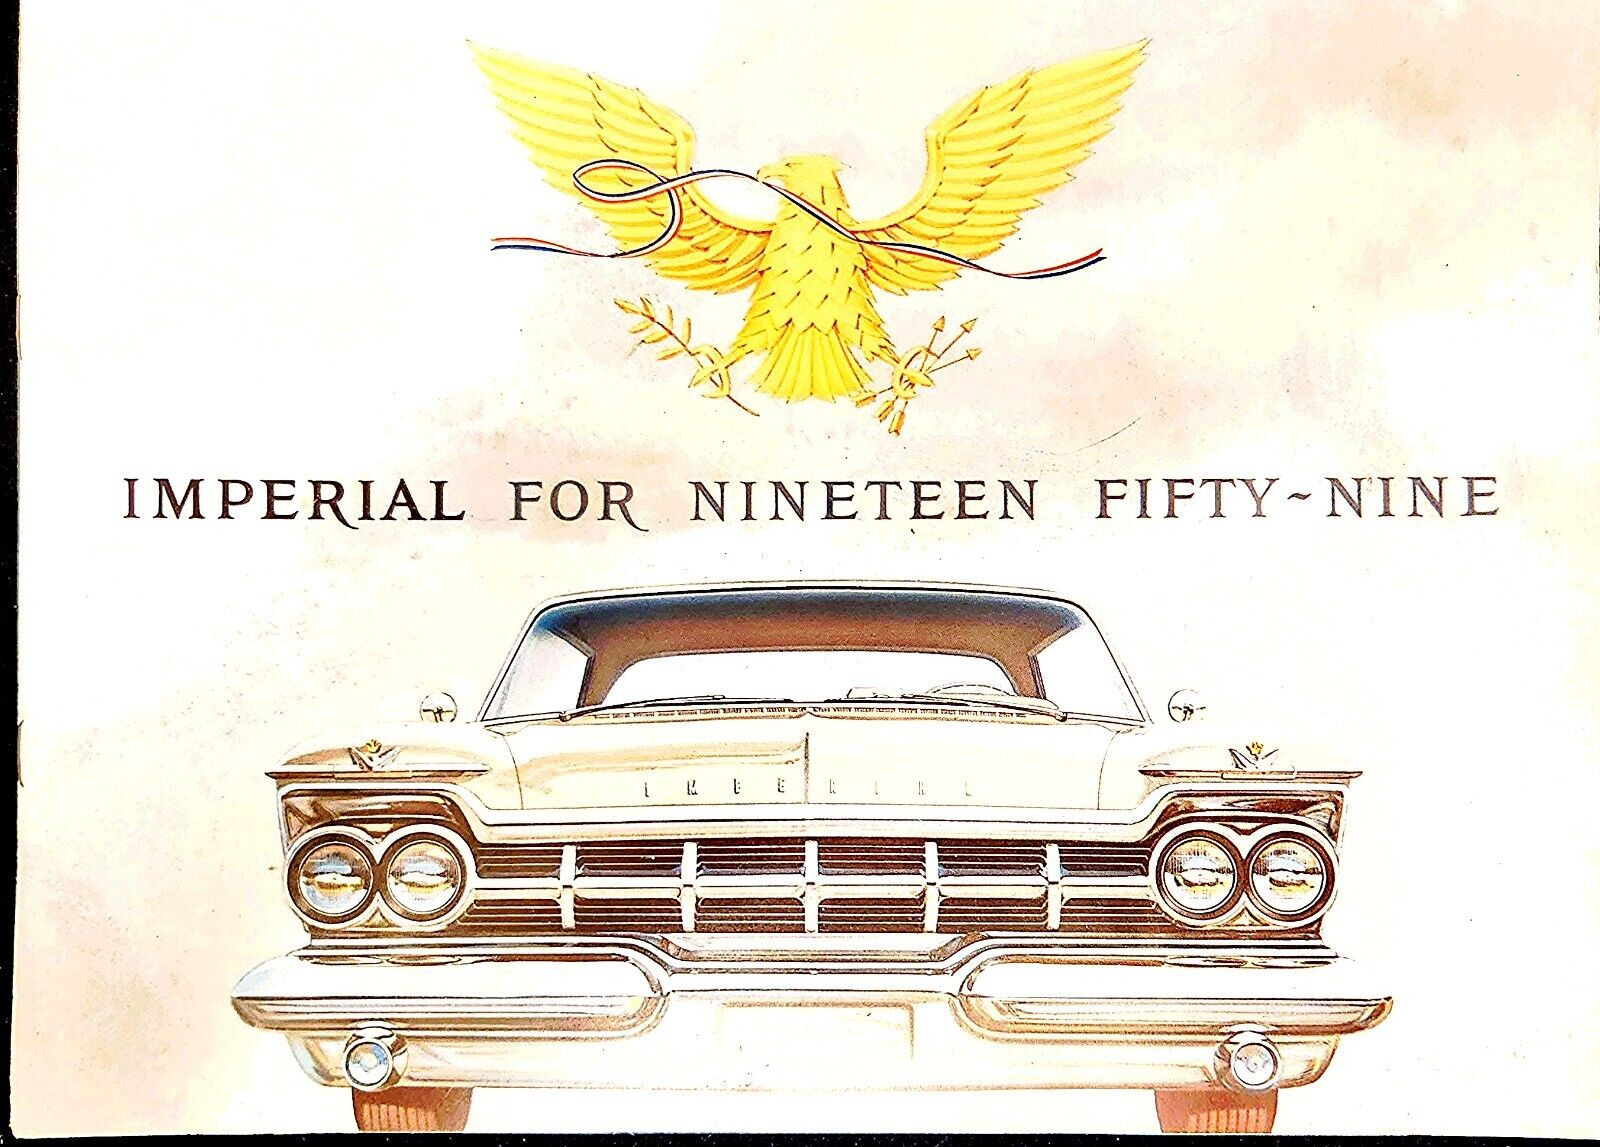 Original 1959 Chrysler Imperial Brochure - Uncirculated - 12 Pages